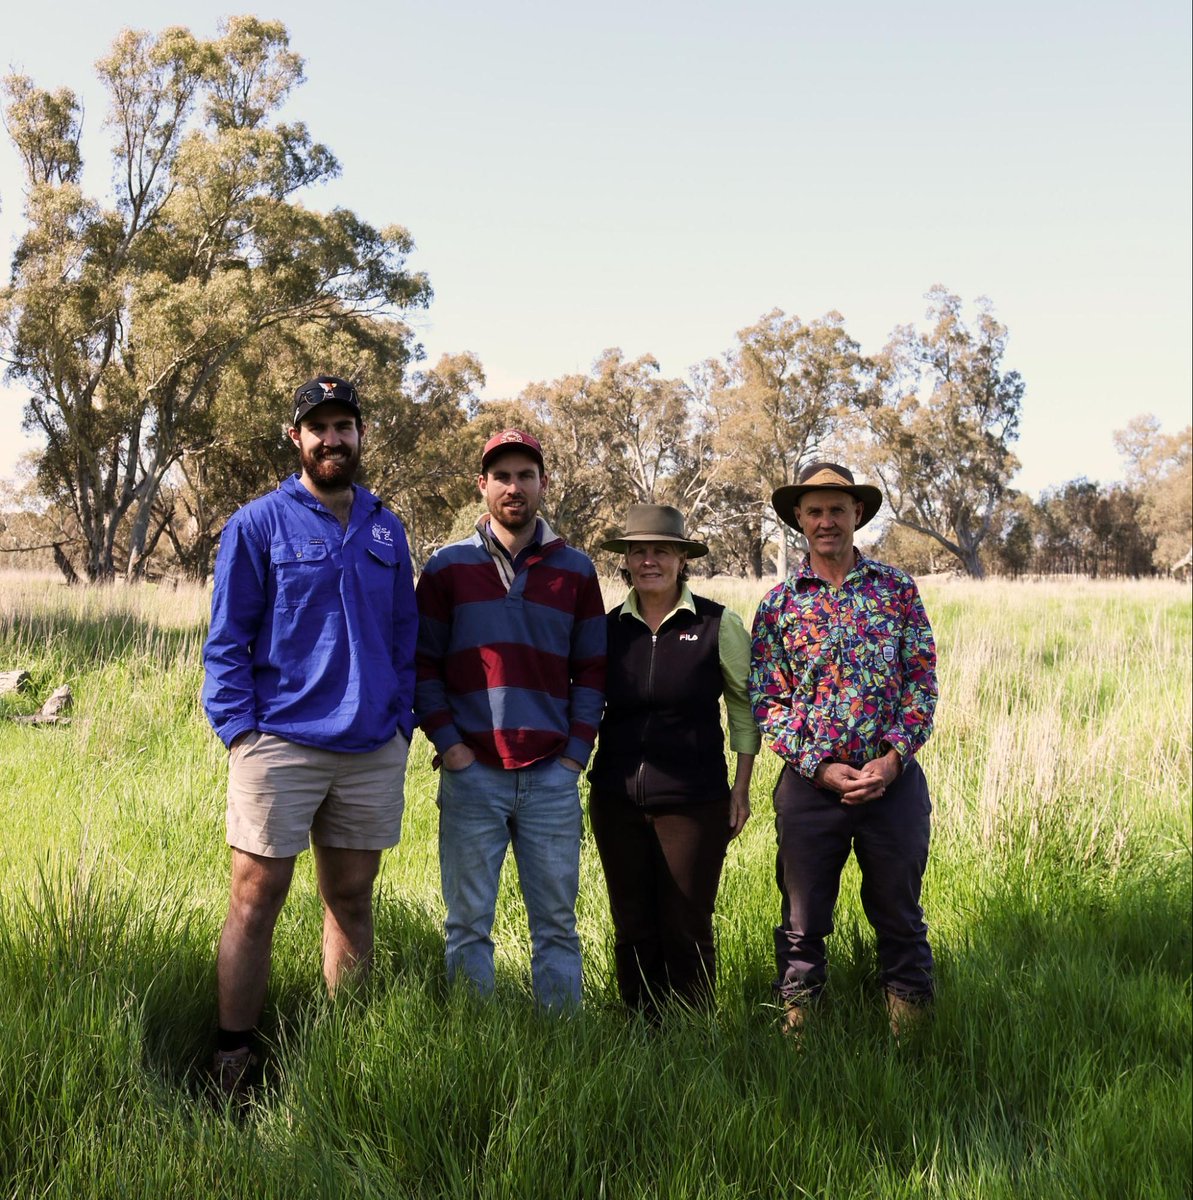 What benefits are farmers seeing from adopting regenerative approaches? We’ve been listening to six different farmers’ perspectives on the positive impacts of regenerative farming. And we’ve produced a new series of case studies on this topic: loom.ly/xX7MJdc